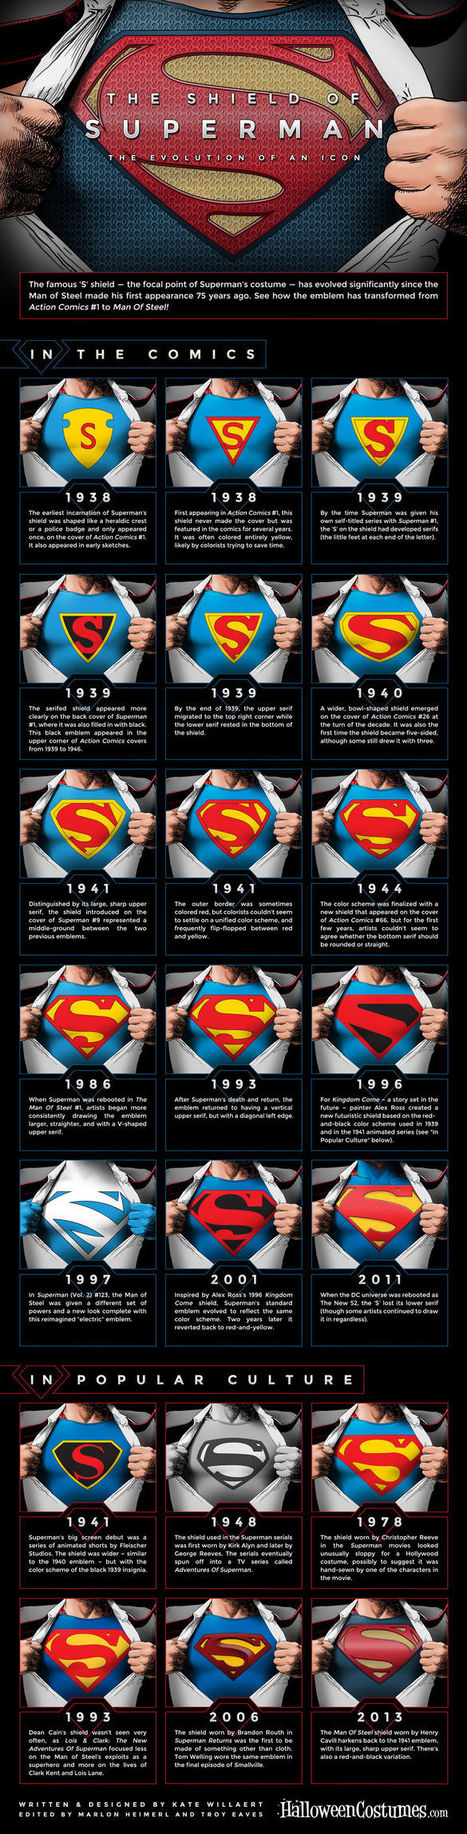 Infographic: The Evolution of the Superman Logo From 1938 To Now | The Creative Commons | Scoop.it